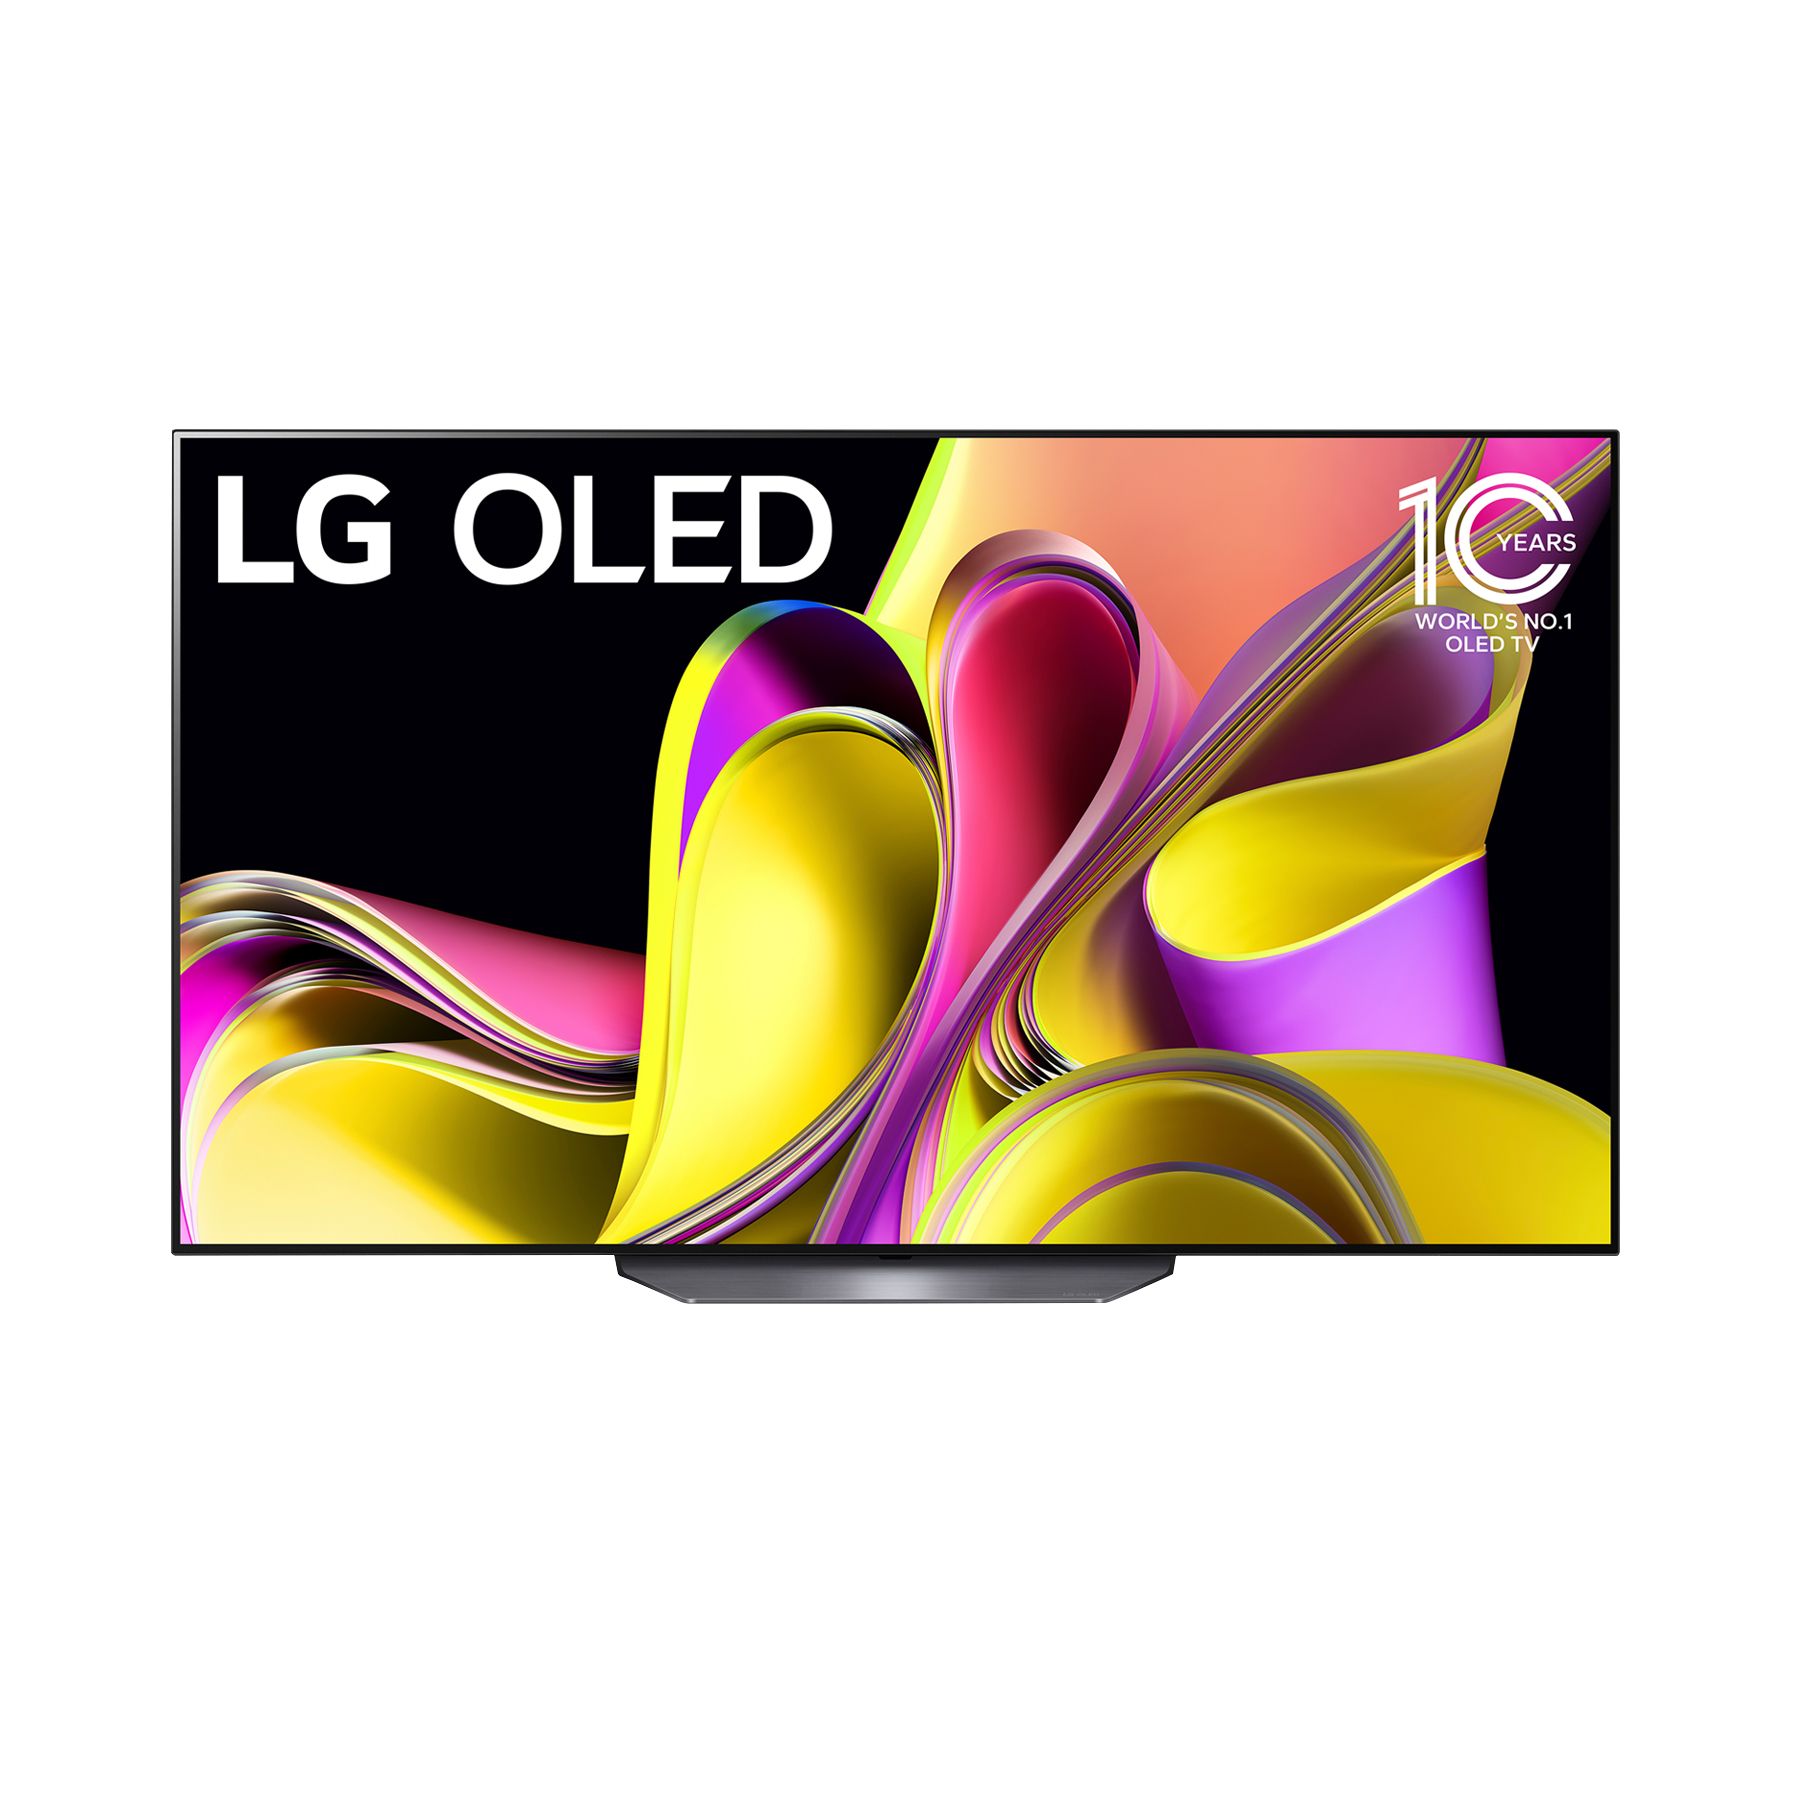 LG StanbyME 27” Class LED Full HD Smart webOS Touch Screen